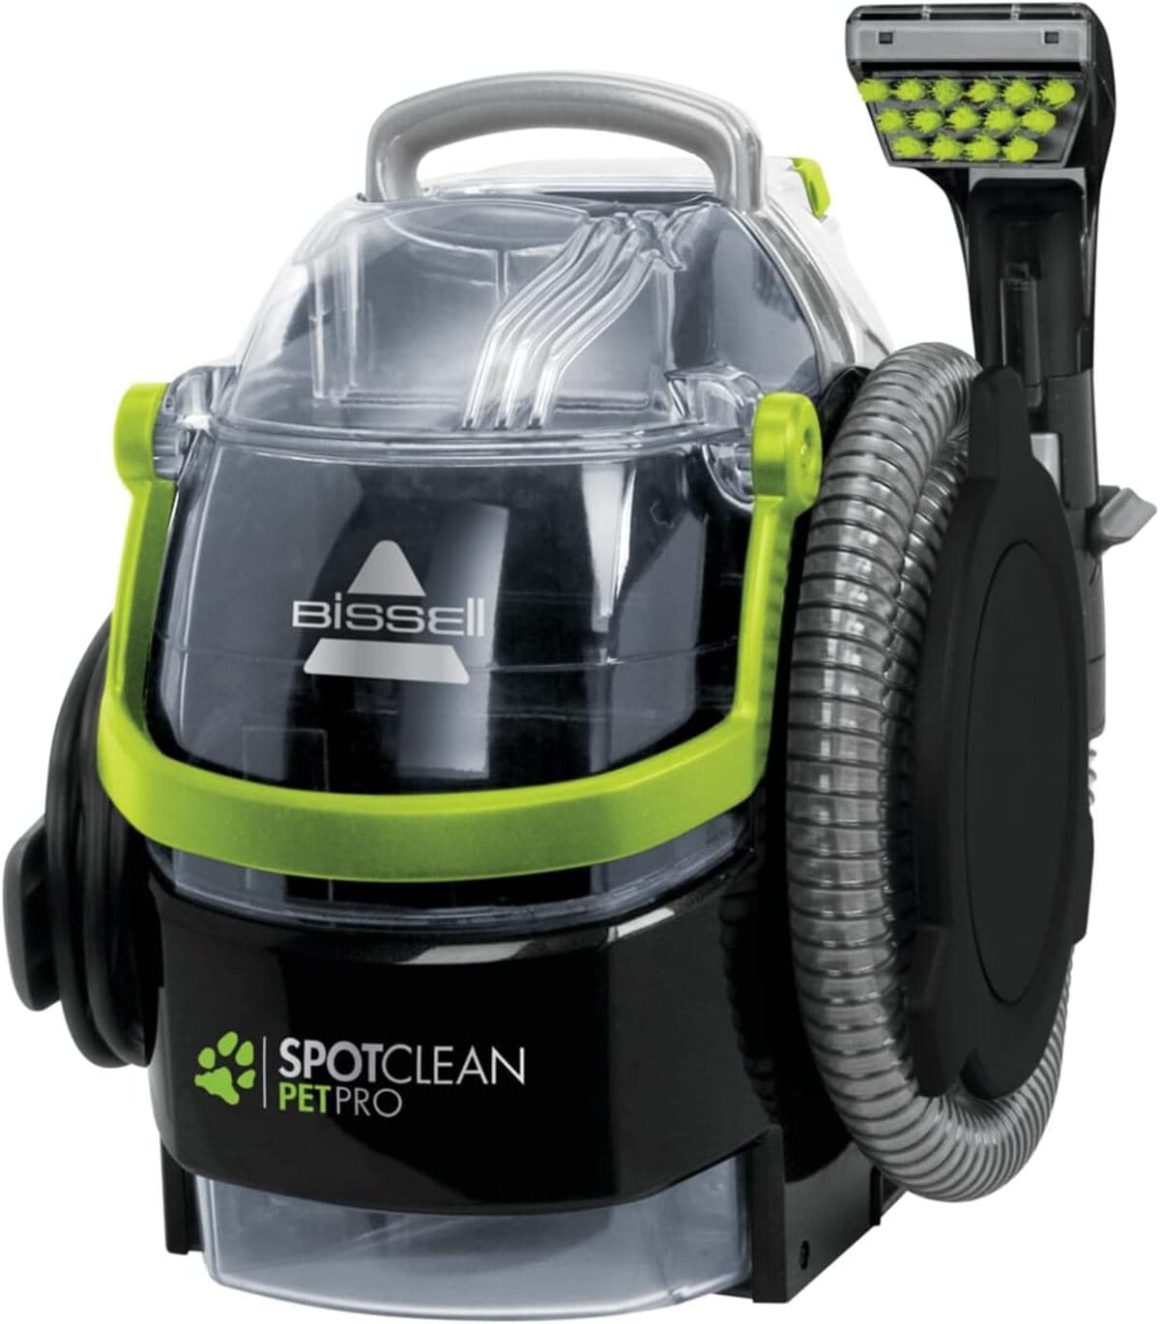 BISSELL SPOTCLEAN PET PRO